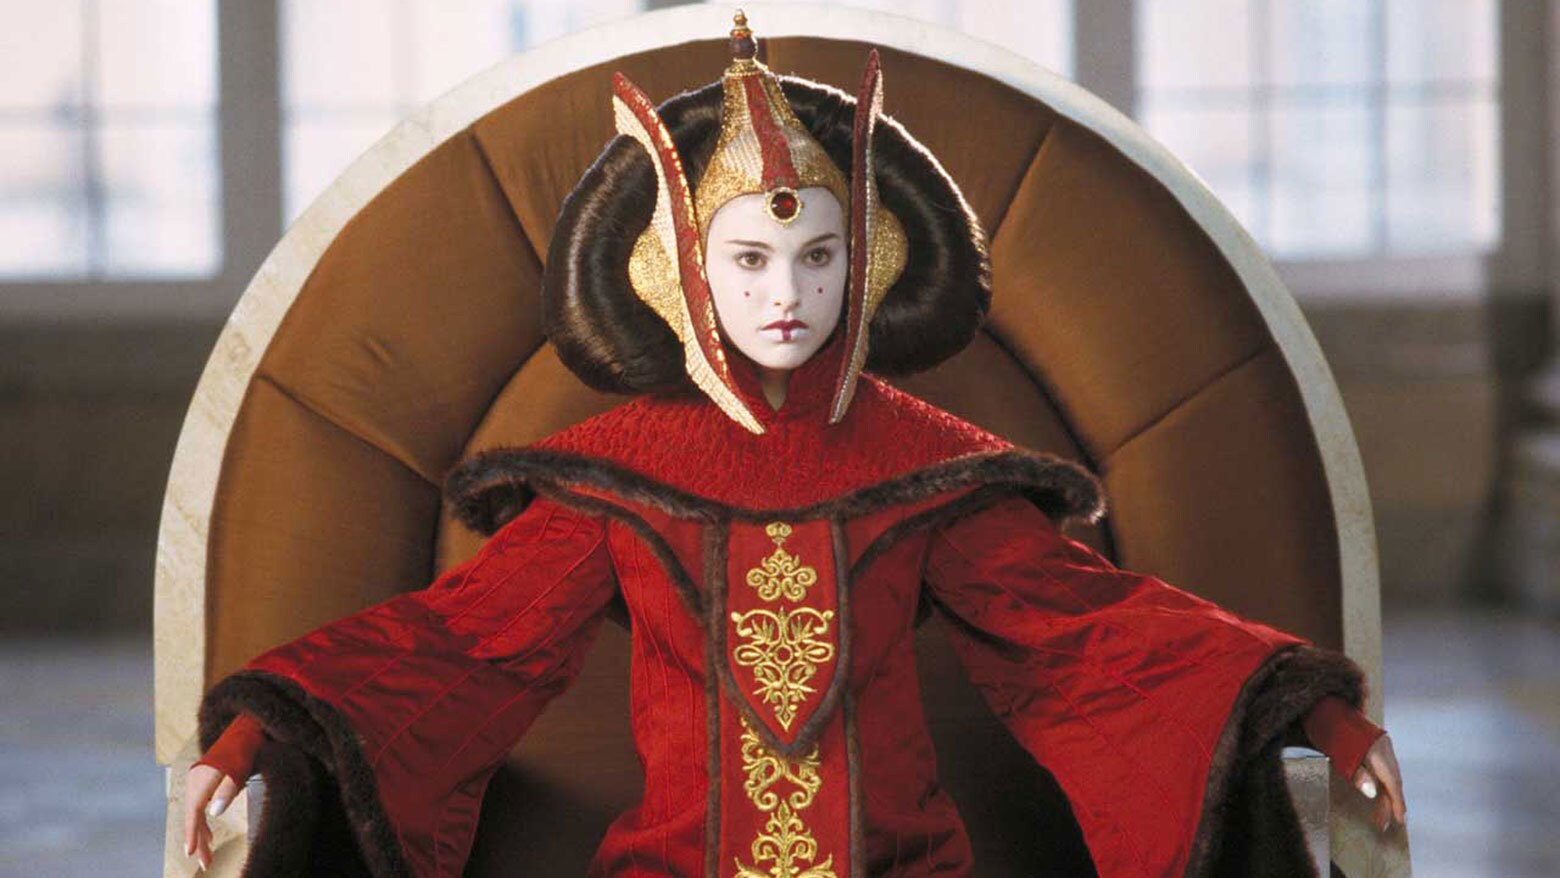 brad longfellow recommends images of padme from star wars pic